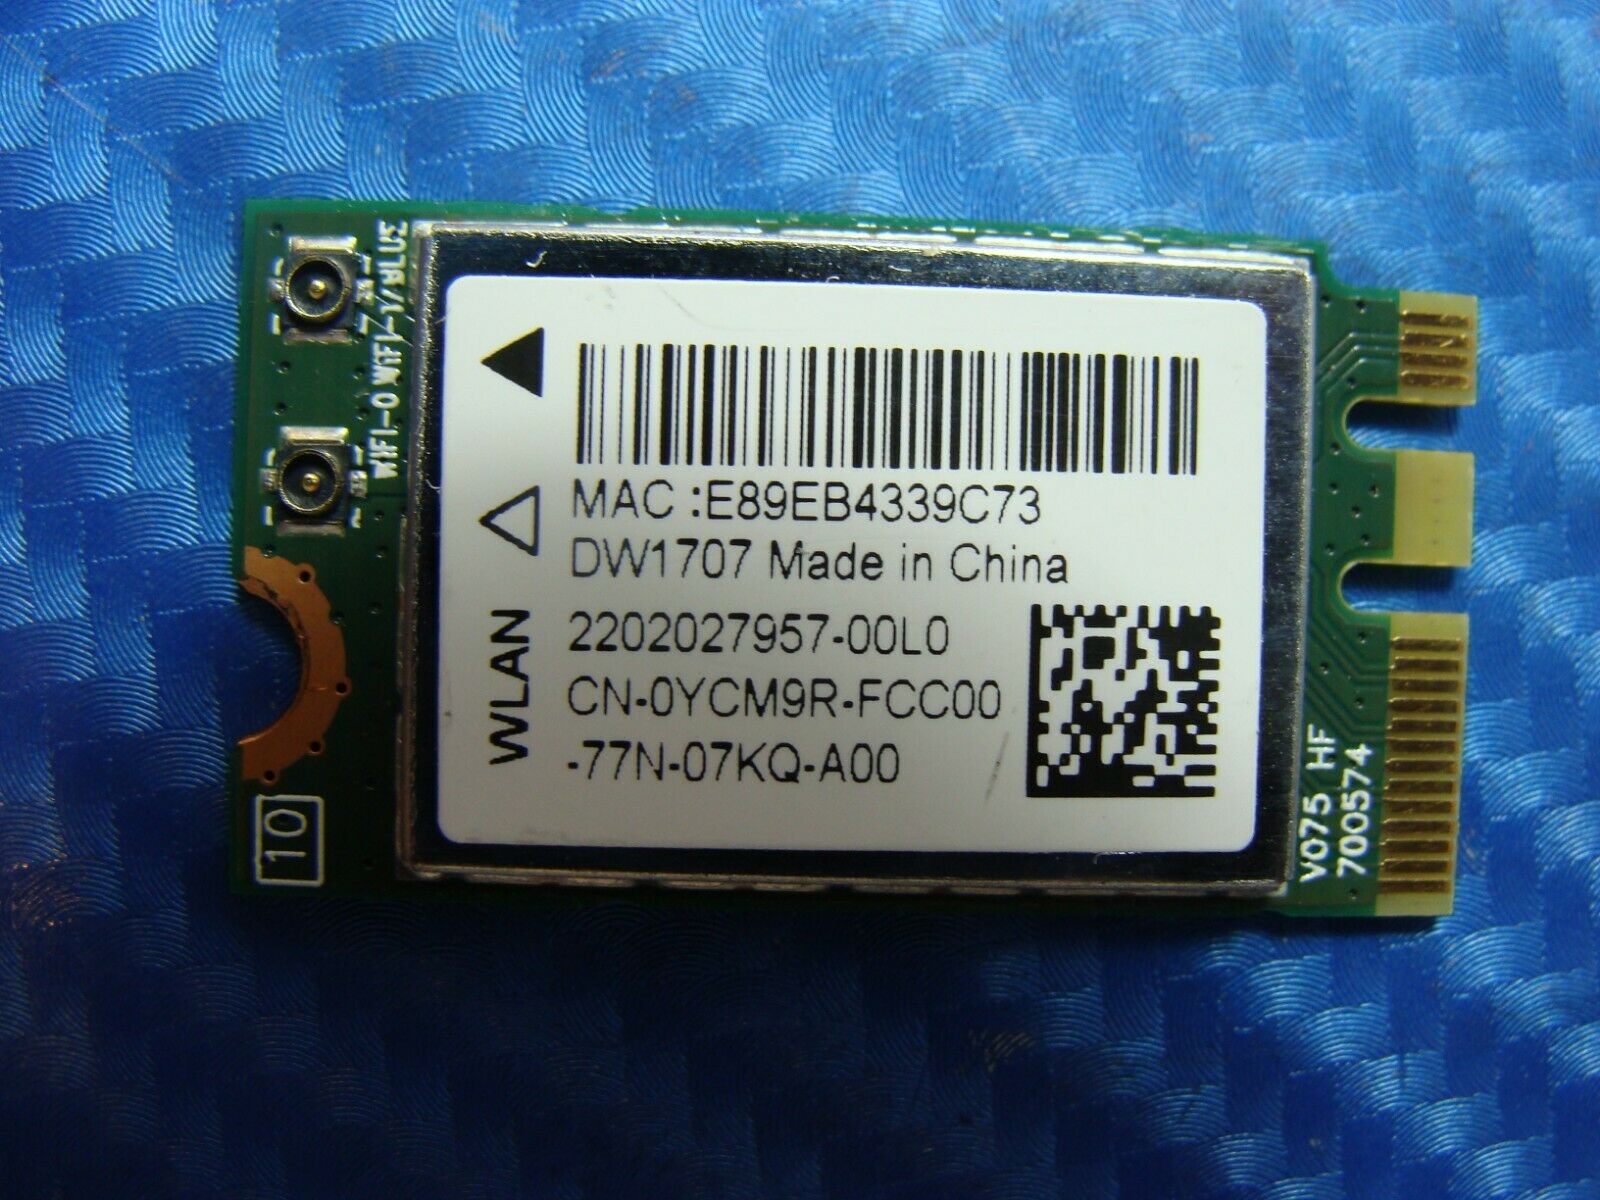 Dell Inspiron 15.6" 15-3567 Genuine WiFi Wireless Card YCM9R QCNFA335 GLP* - Laptop Parts - Buy Authentic Computer Parts - Top Seller Ebay